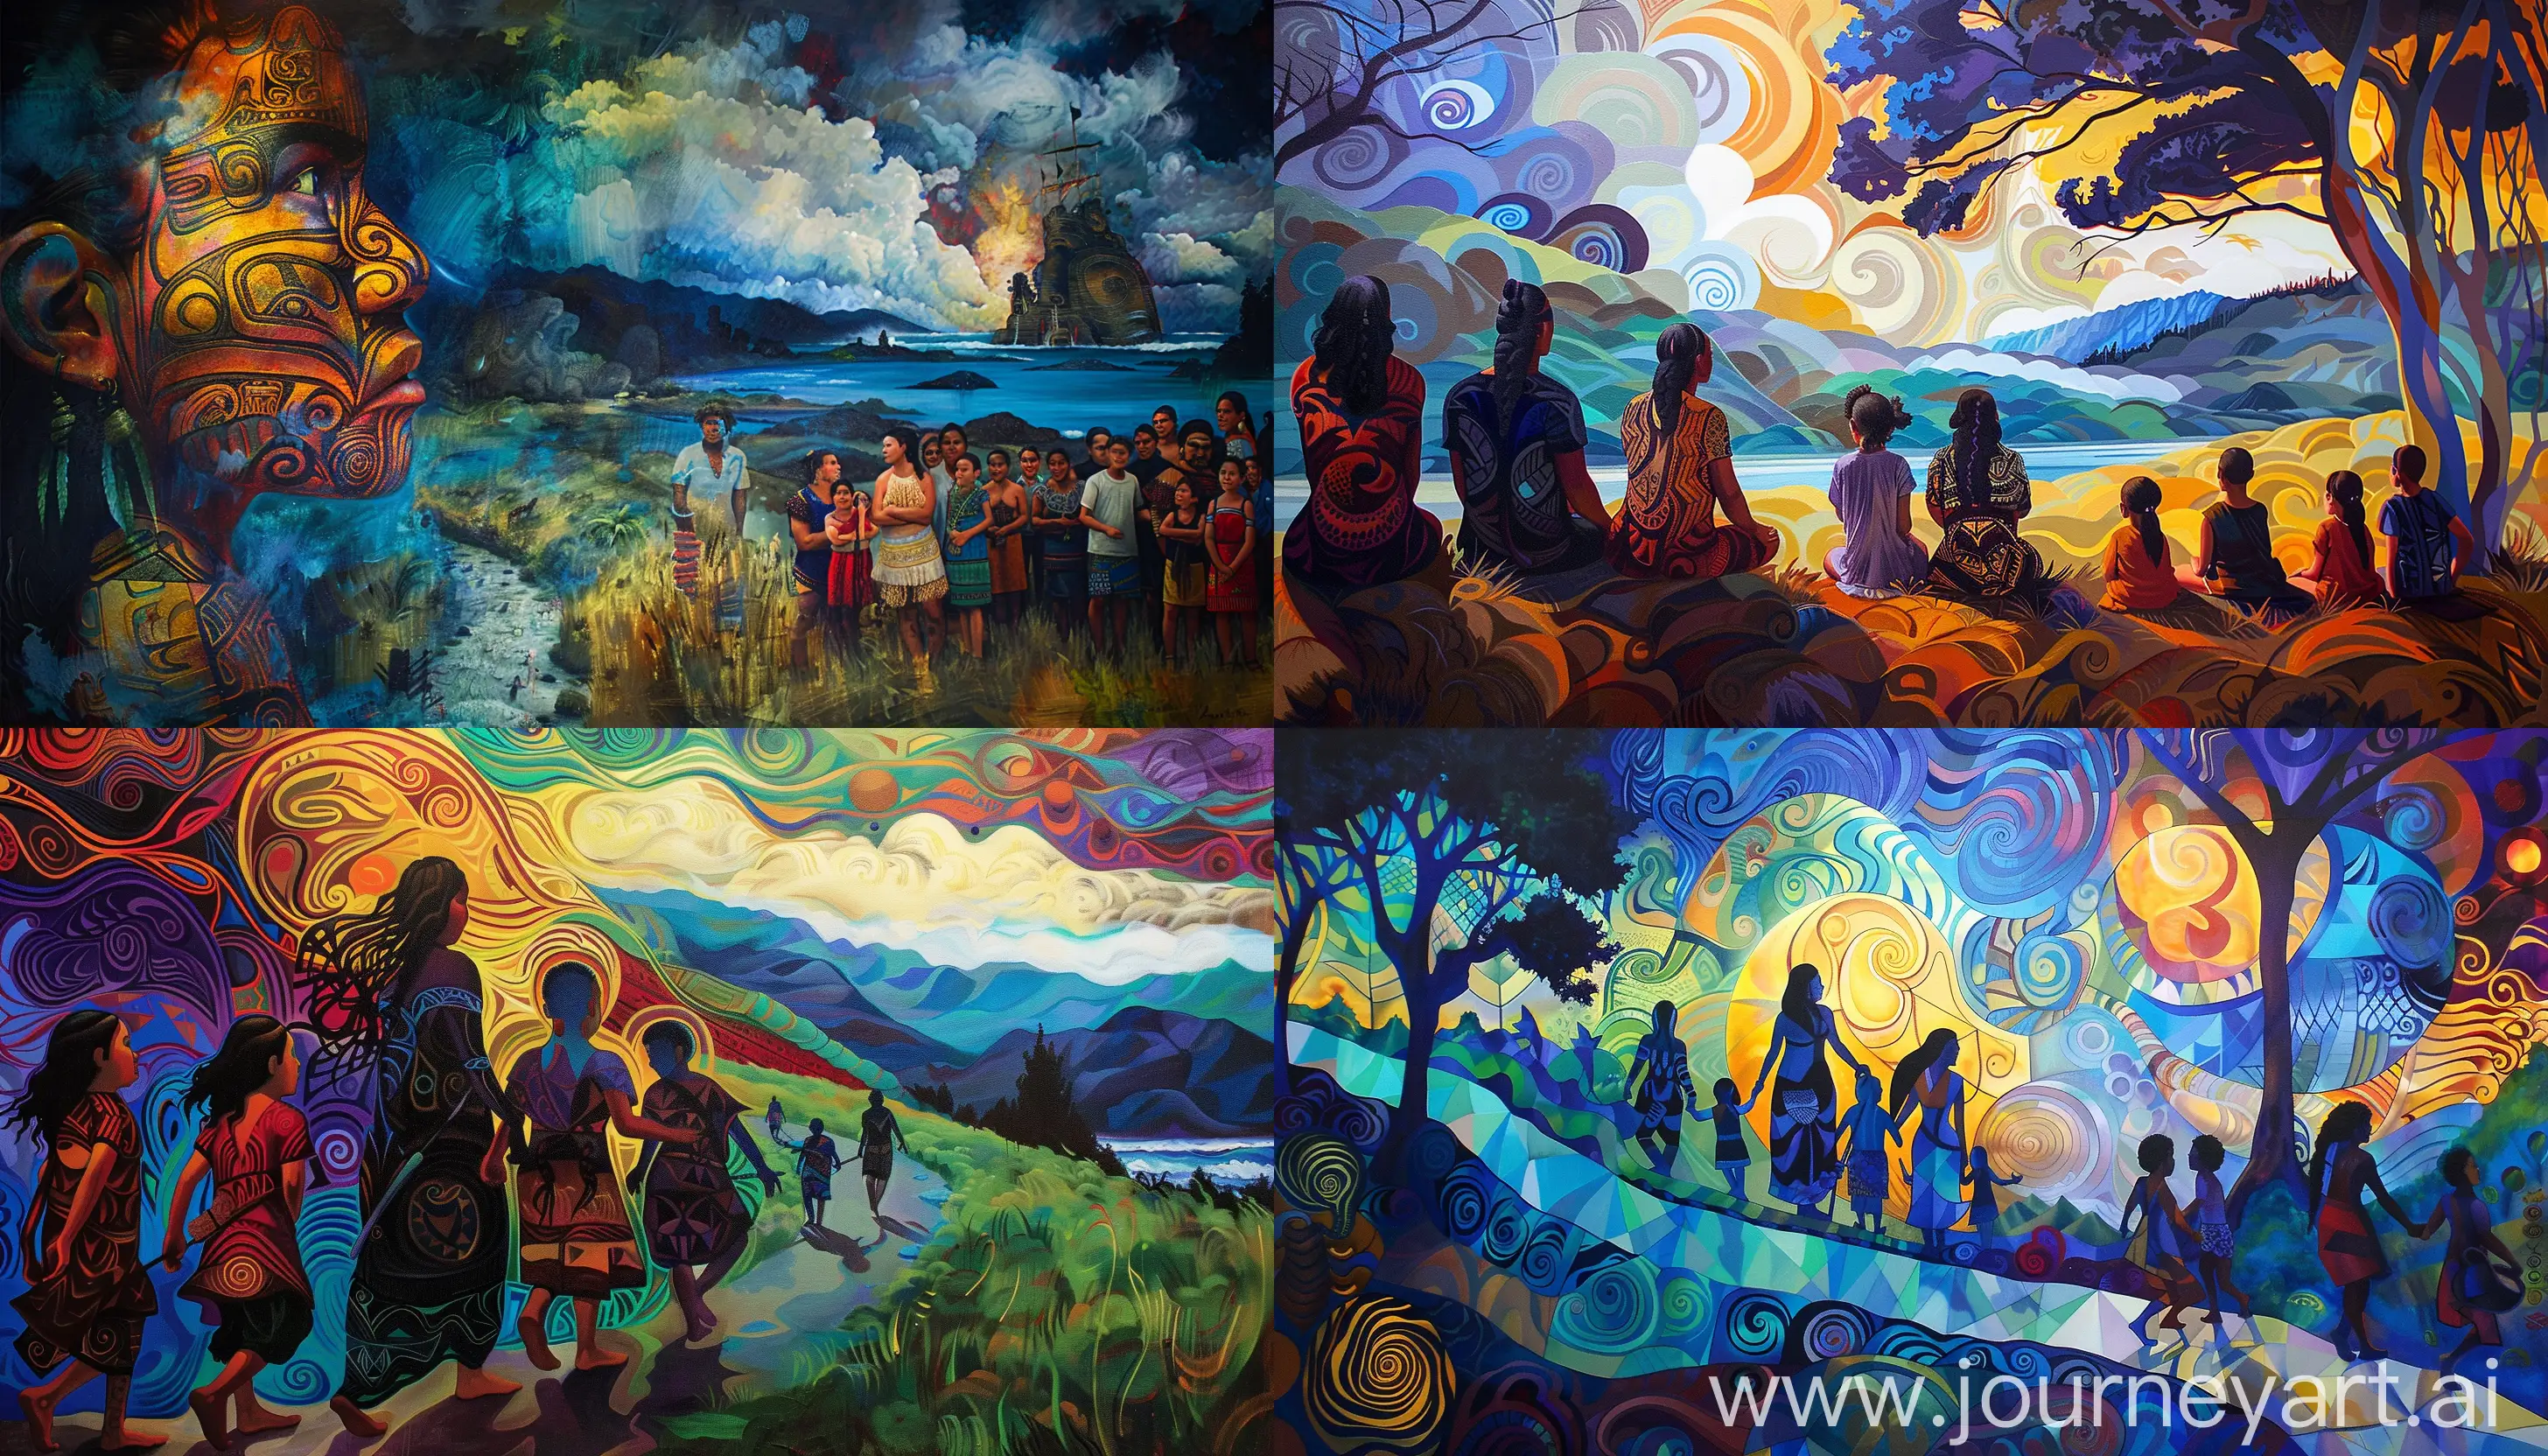 beautiful contemporary painting of a scenery about maori people migration in Aotearoa, traveling to new land of New Zealand, warrior women and children, award winning design, story of Aotearoa culture, abstract,--v 6.0 --ar 7:4